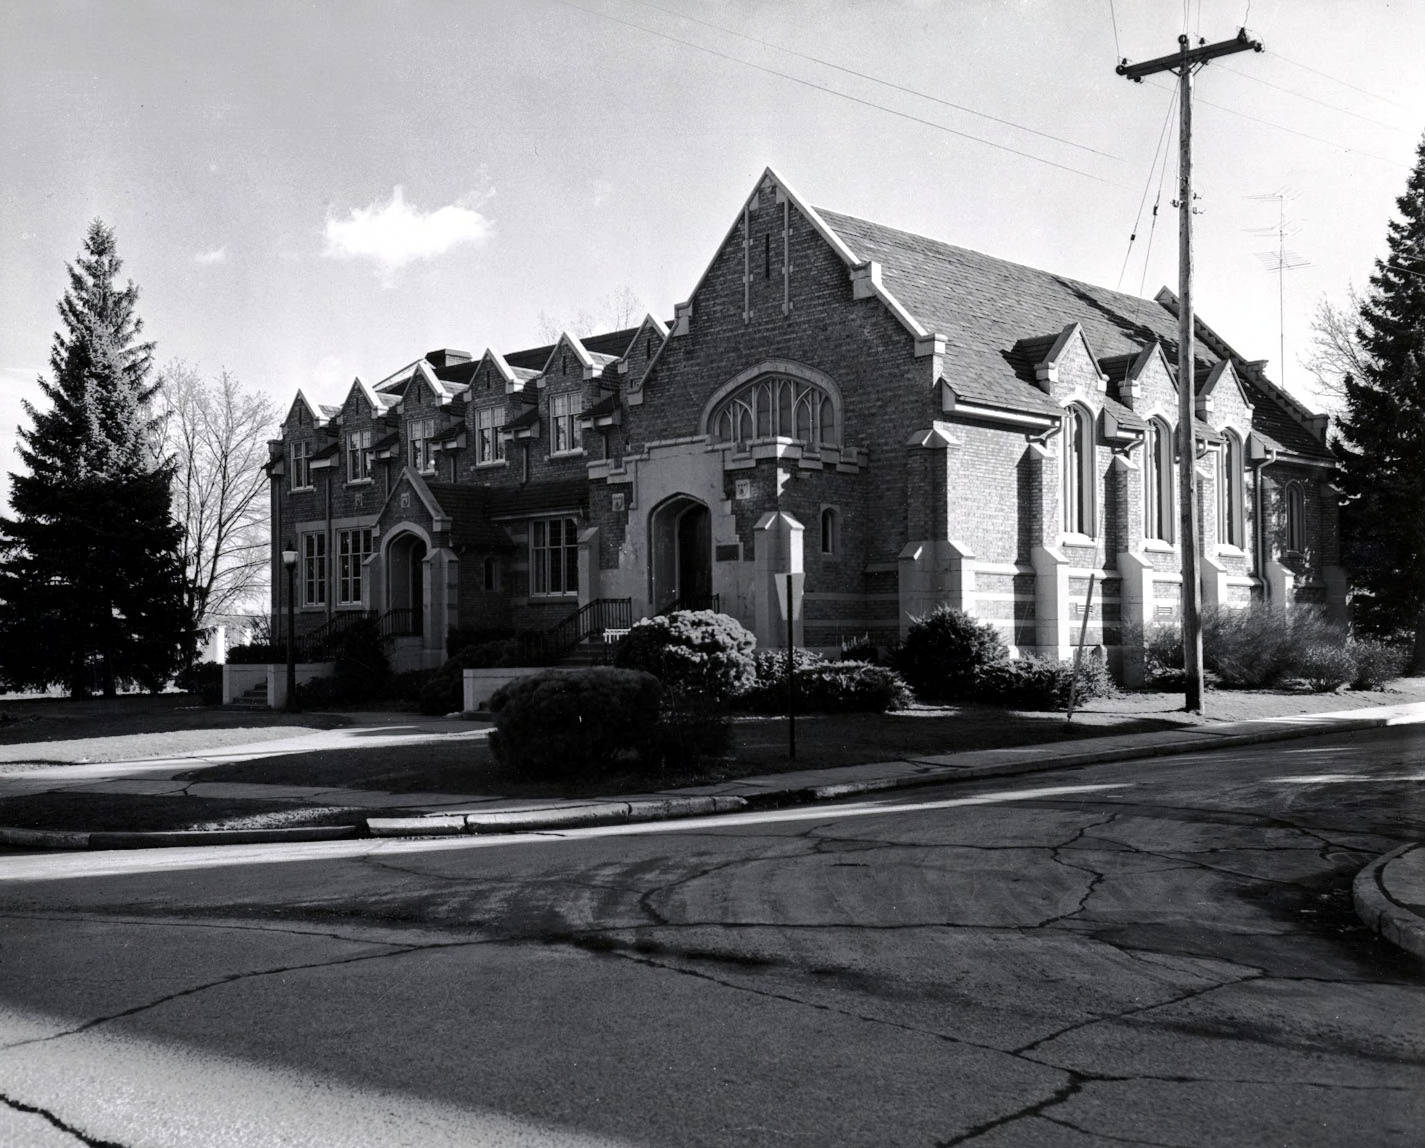 A black and white image of the Church of Jesus Christ of Latter-day Saints Institute of Religion